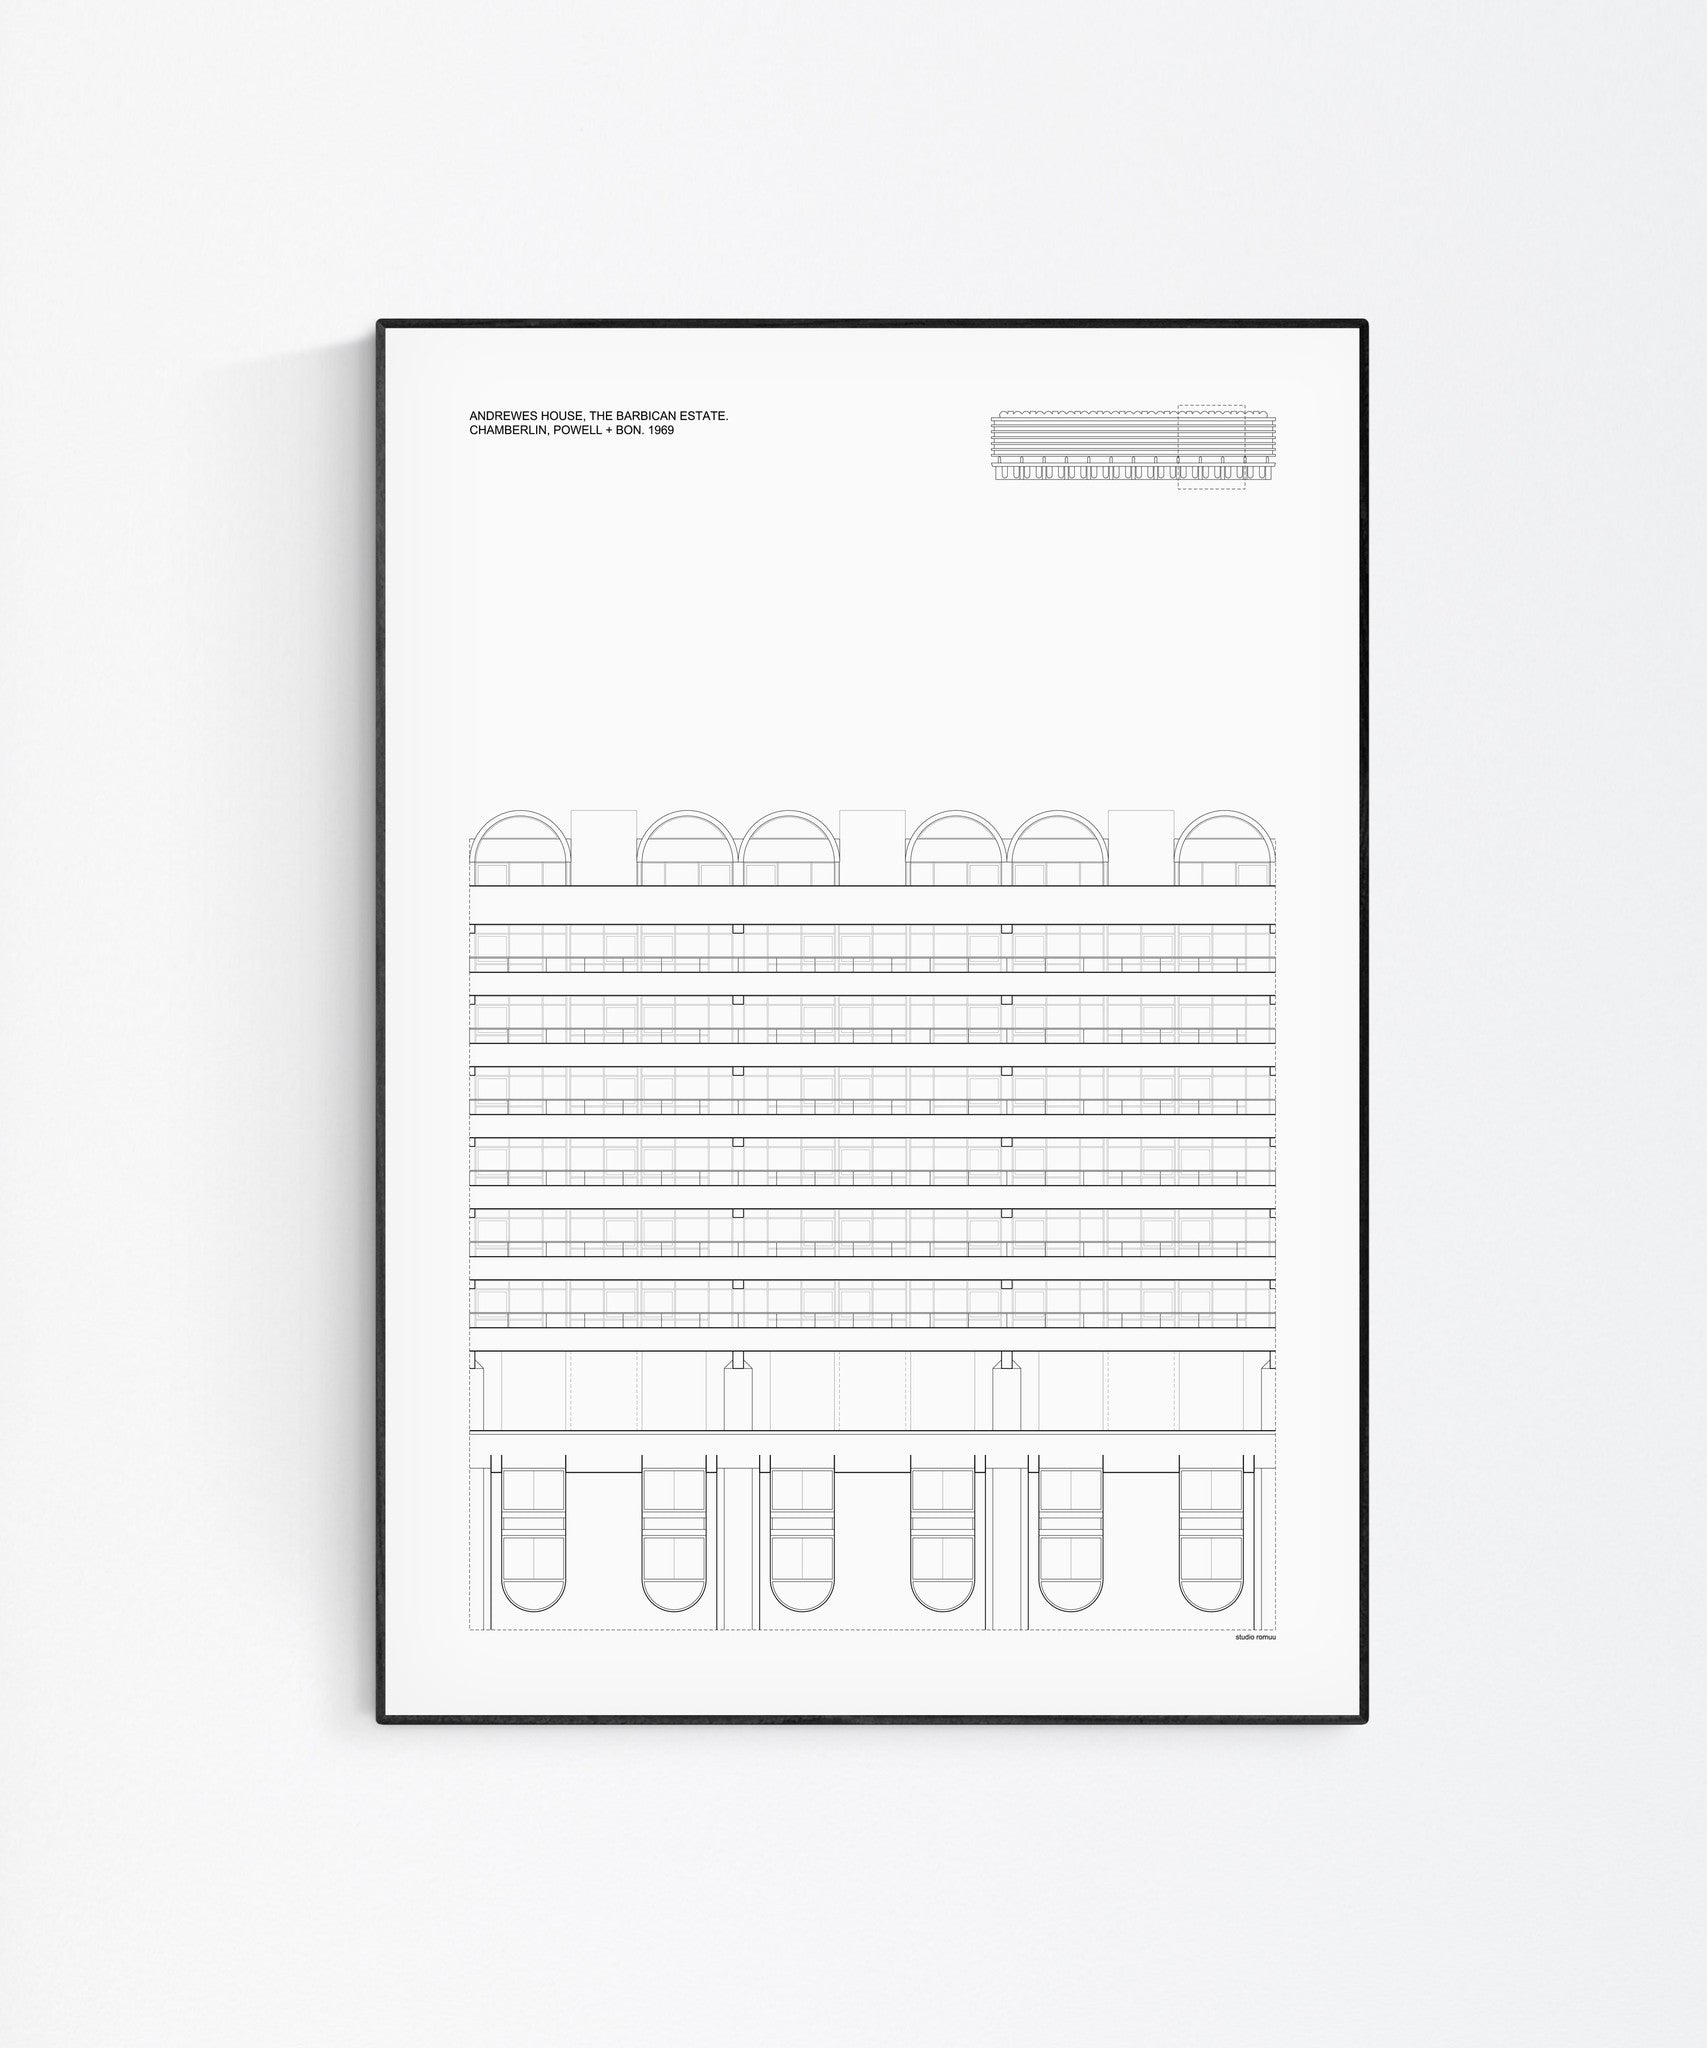 Andrewes House at the Barbican Architecture Print by Studio Romuu - Elevation